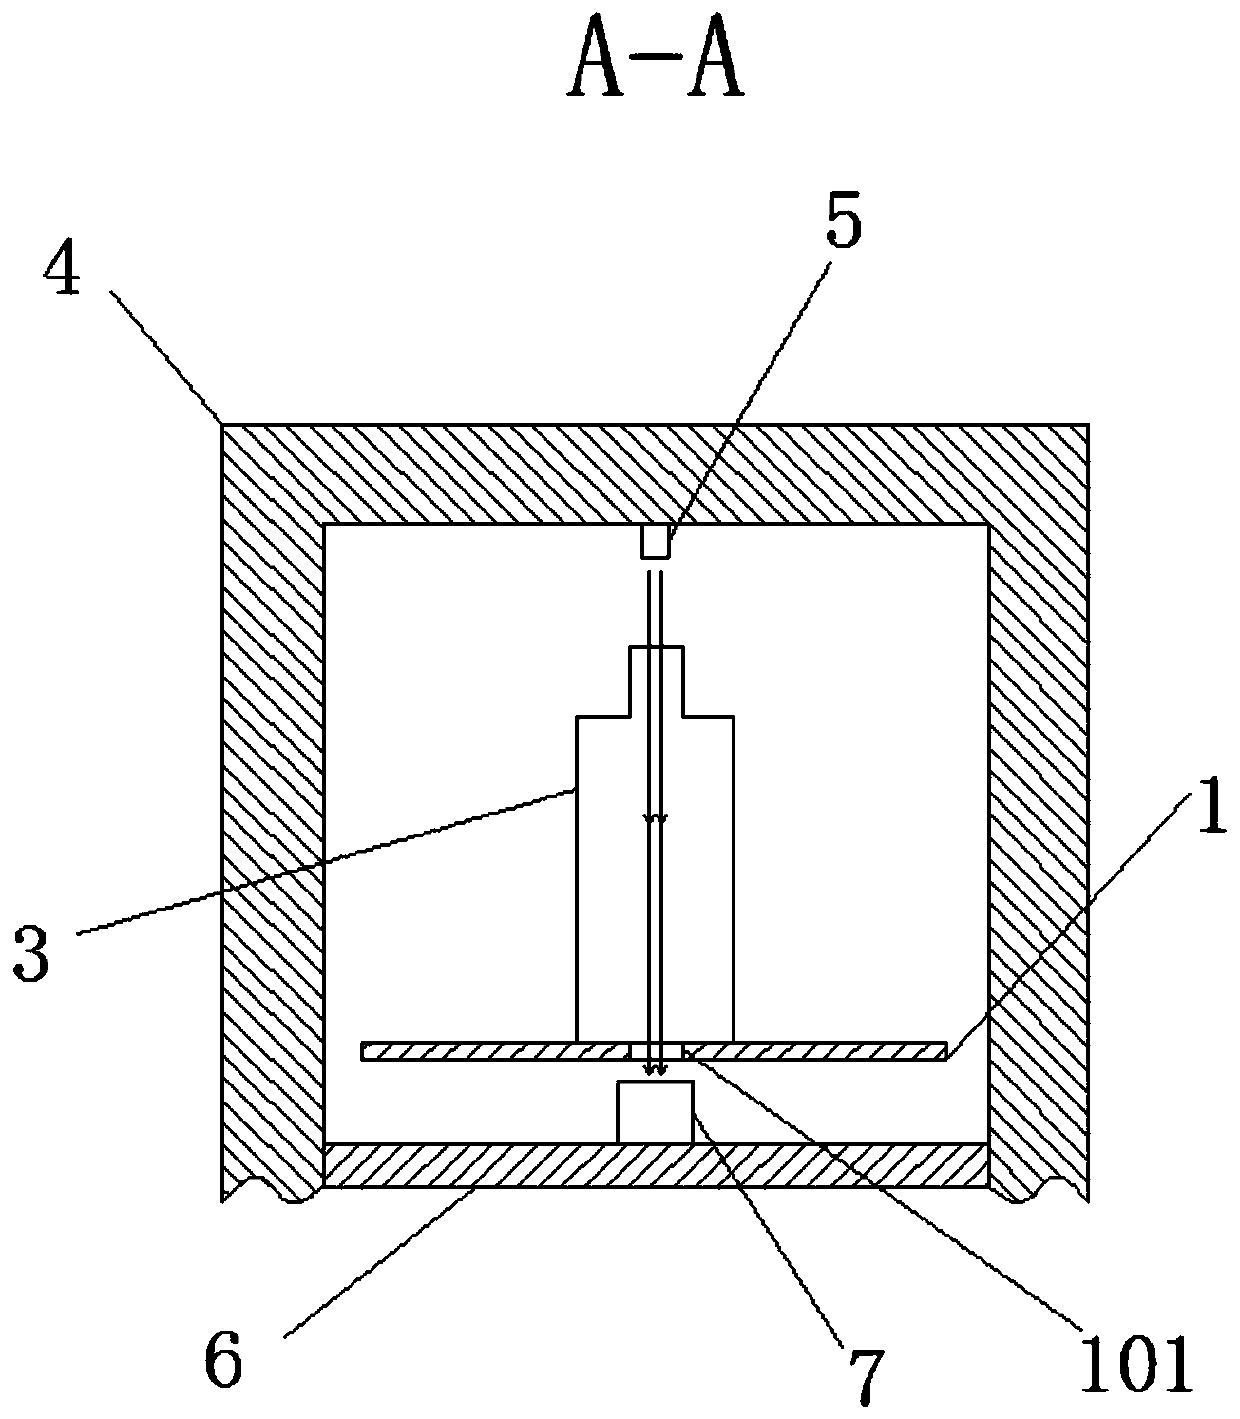 Plastic bottle classifying and recycling device based on light element composition principle